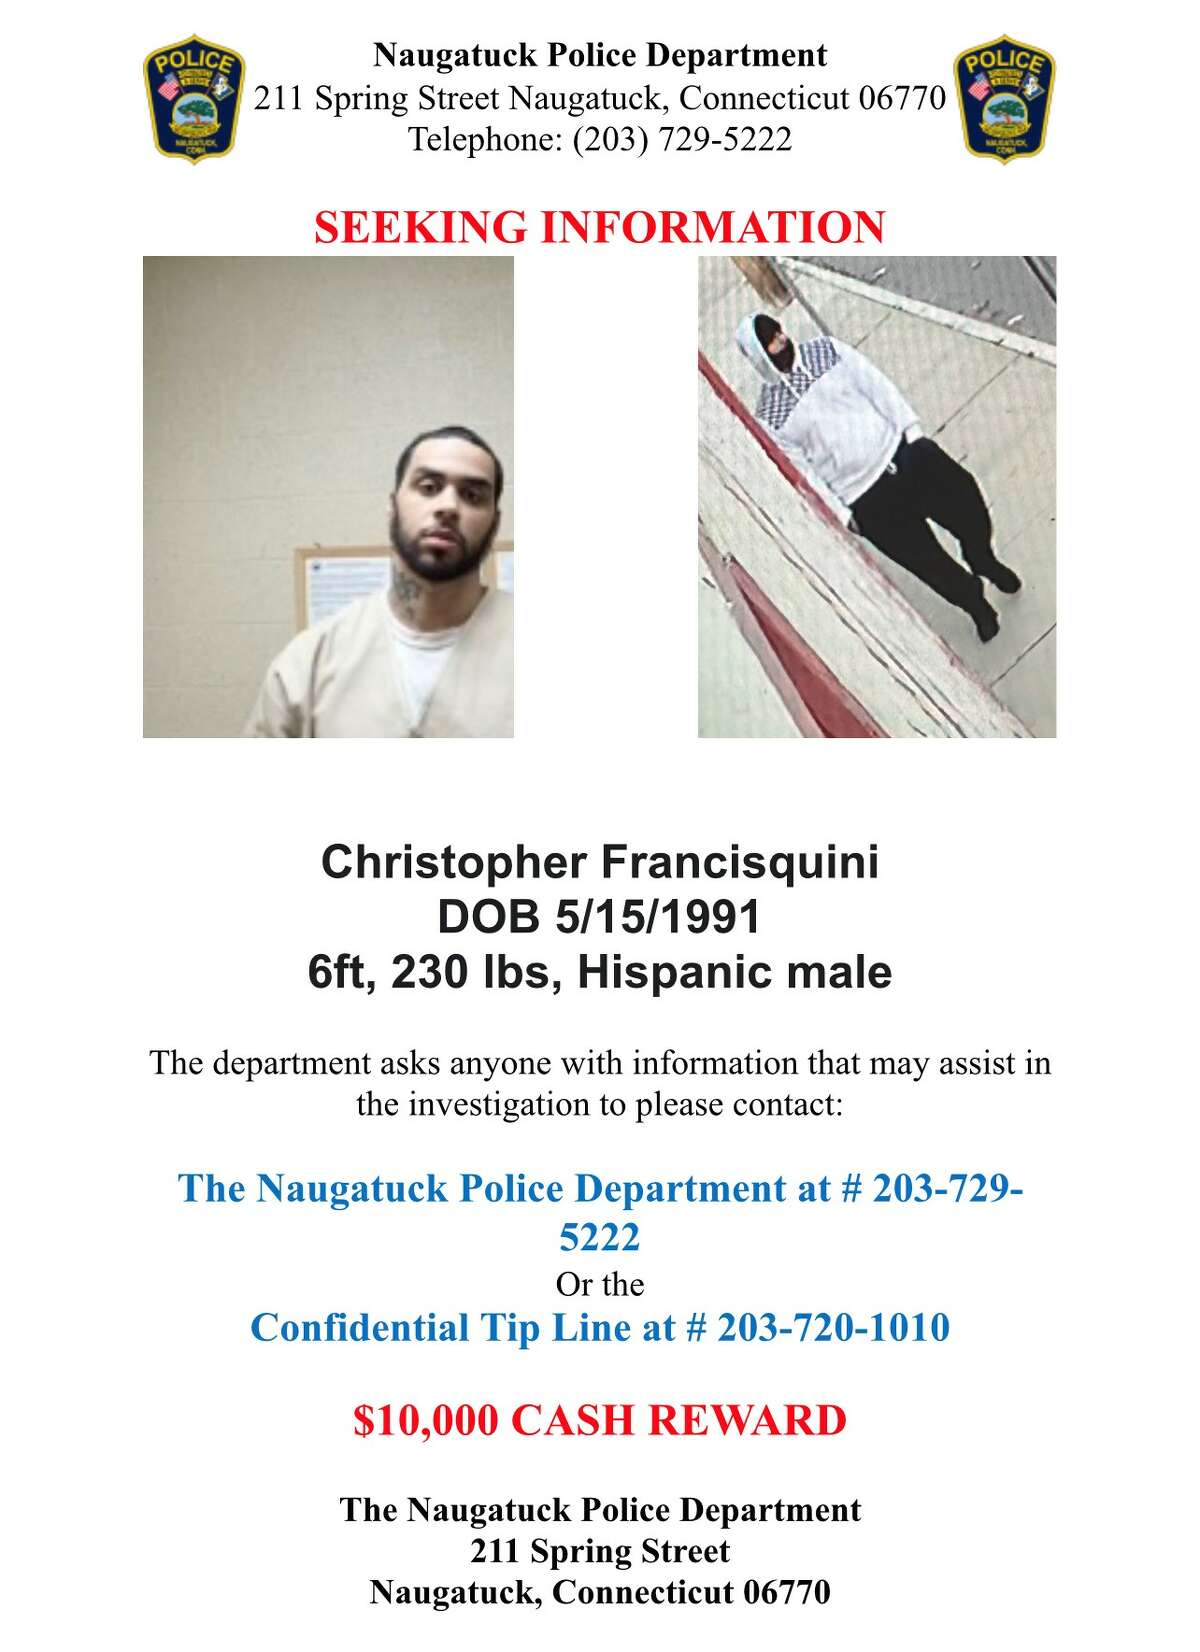 Police are searching for Christopher Francisquini, accused of killing his infant daughter earlier this month.